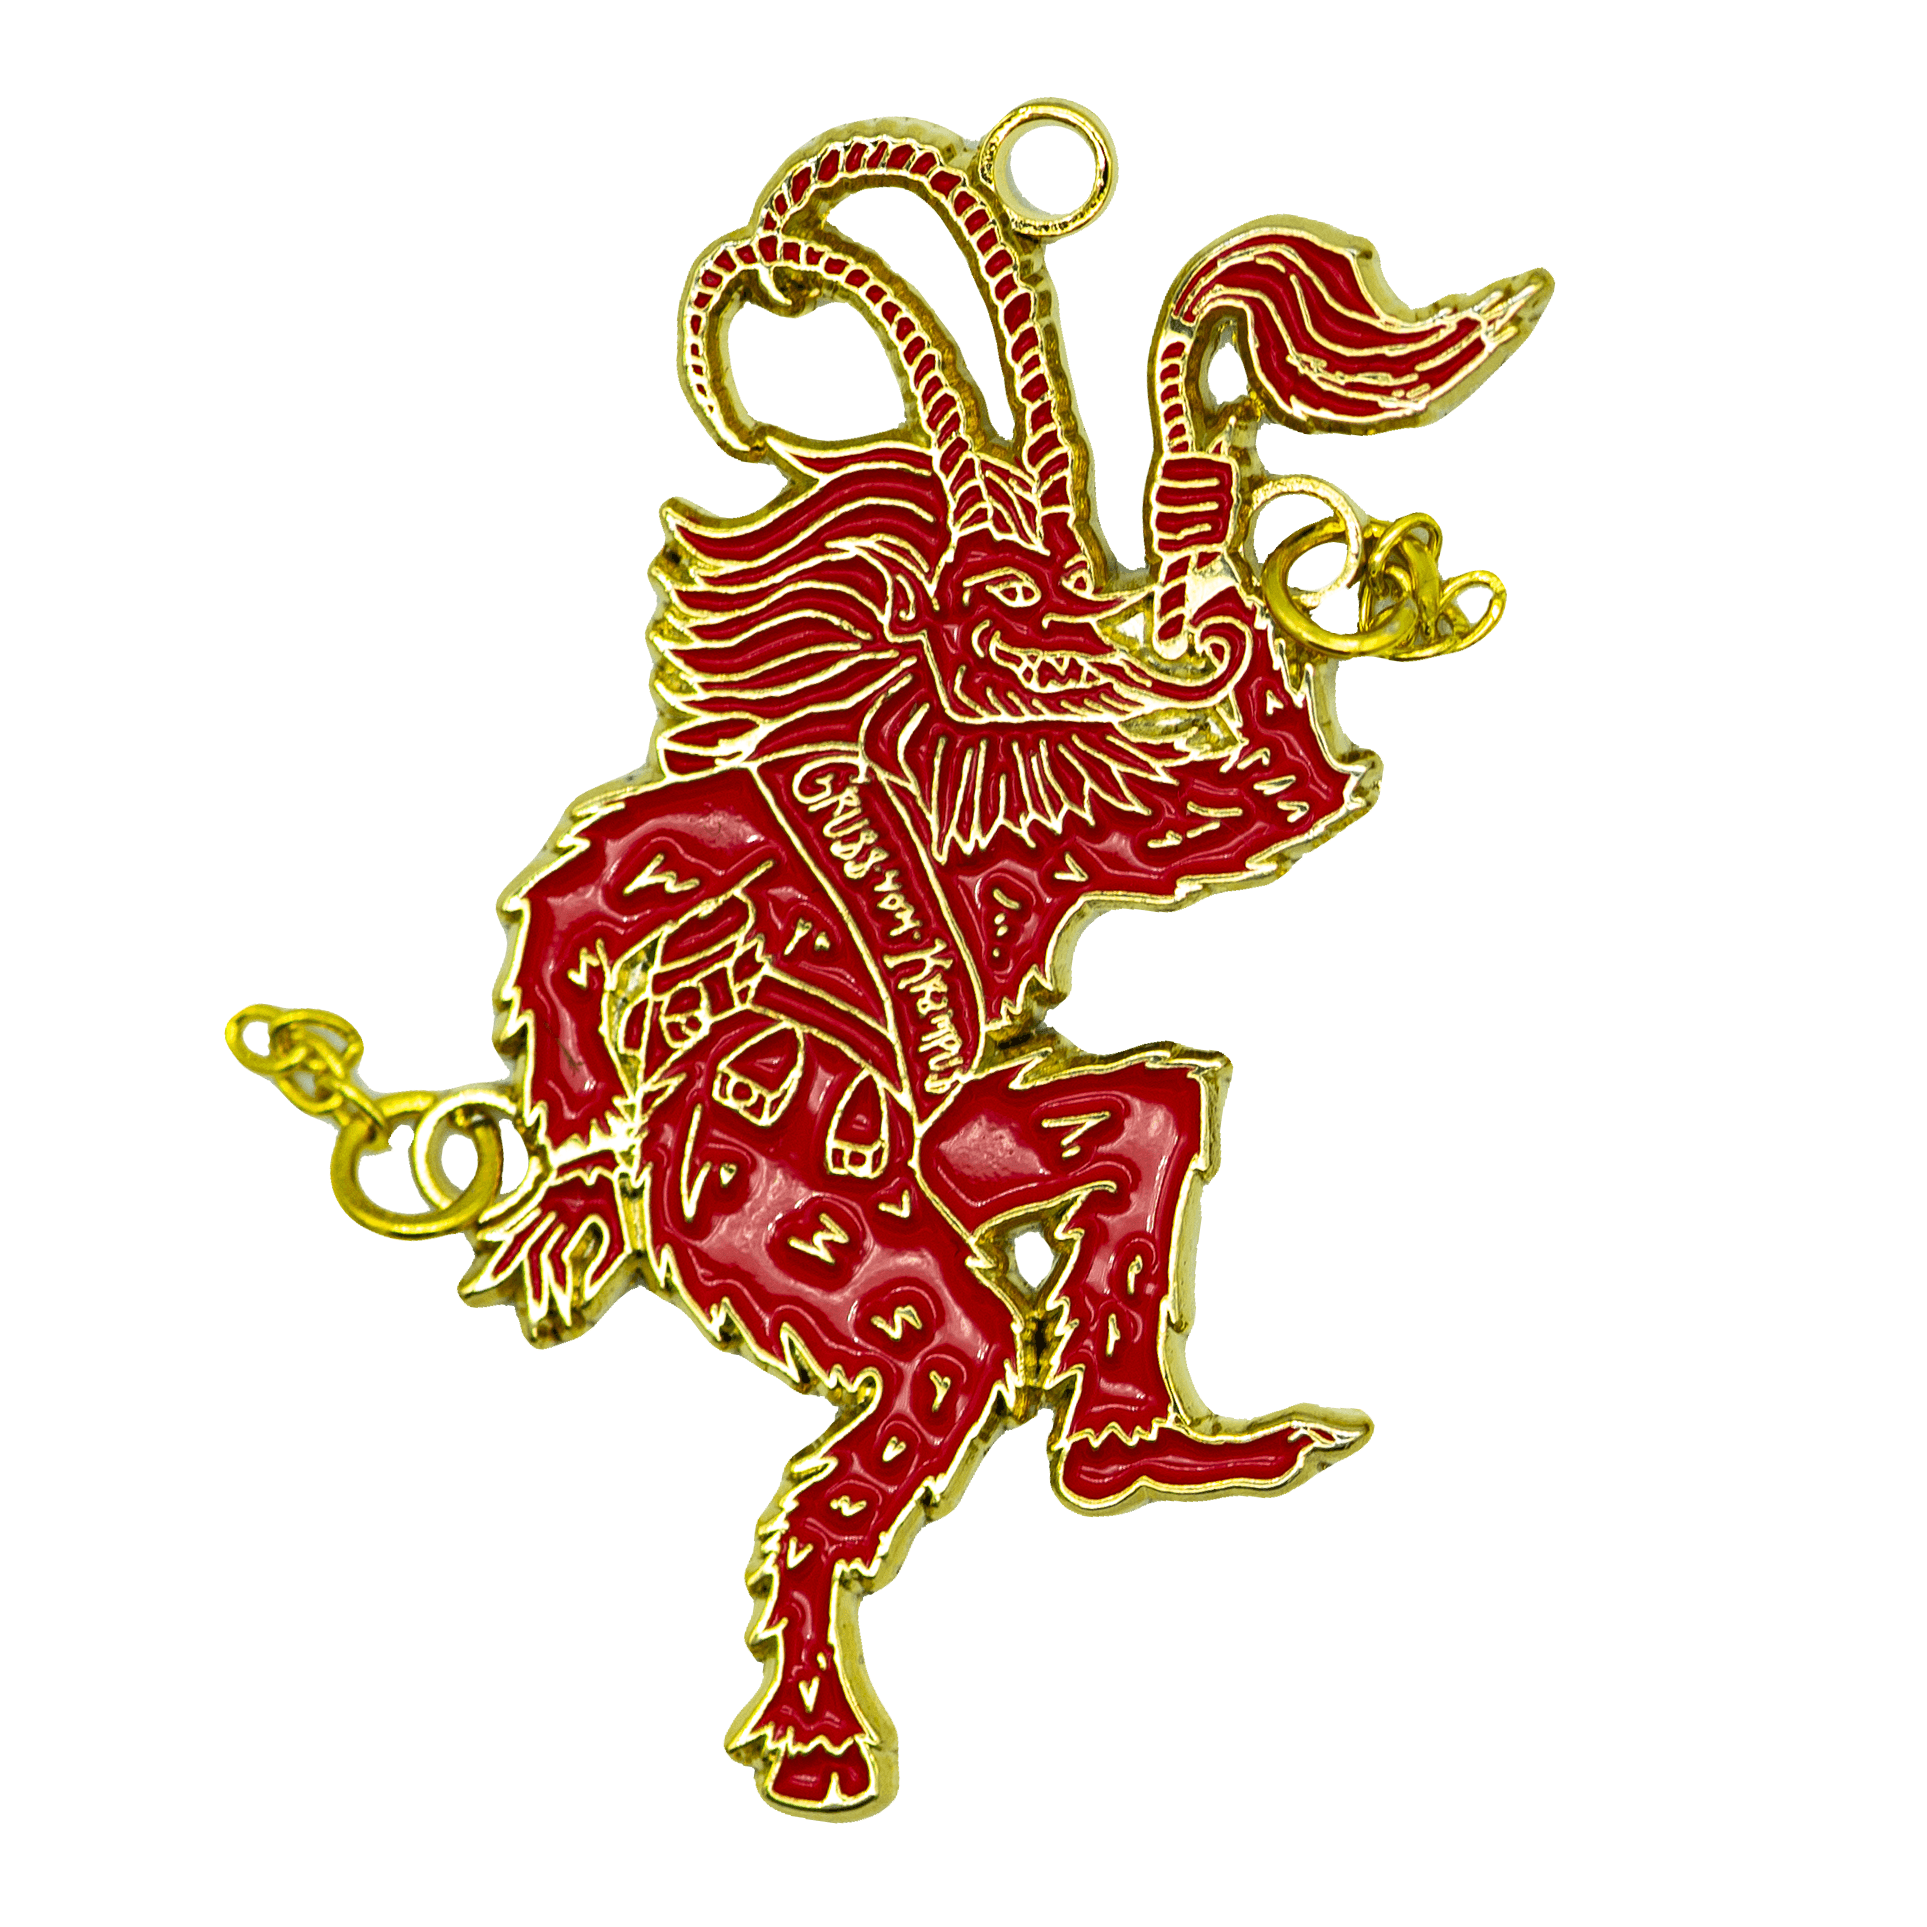 A red and gold ornament of Krampus sticking his tongue out and flailing his chains as he dances. He wears a sash that reads "Gross Vom Krampus". 